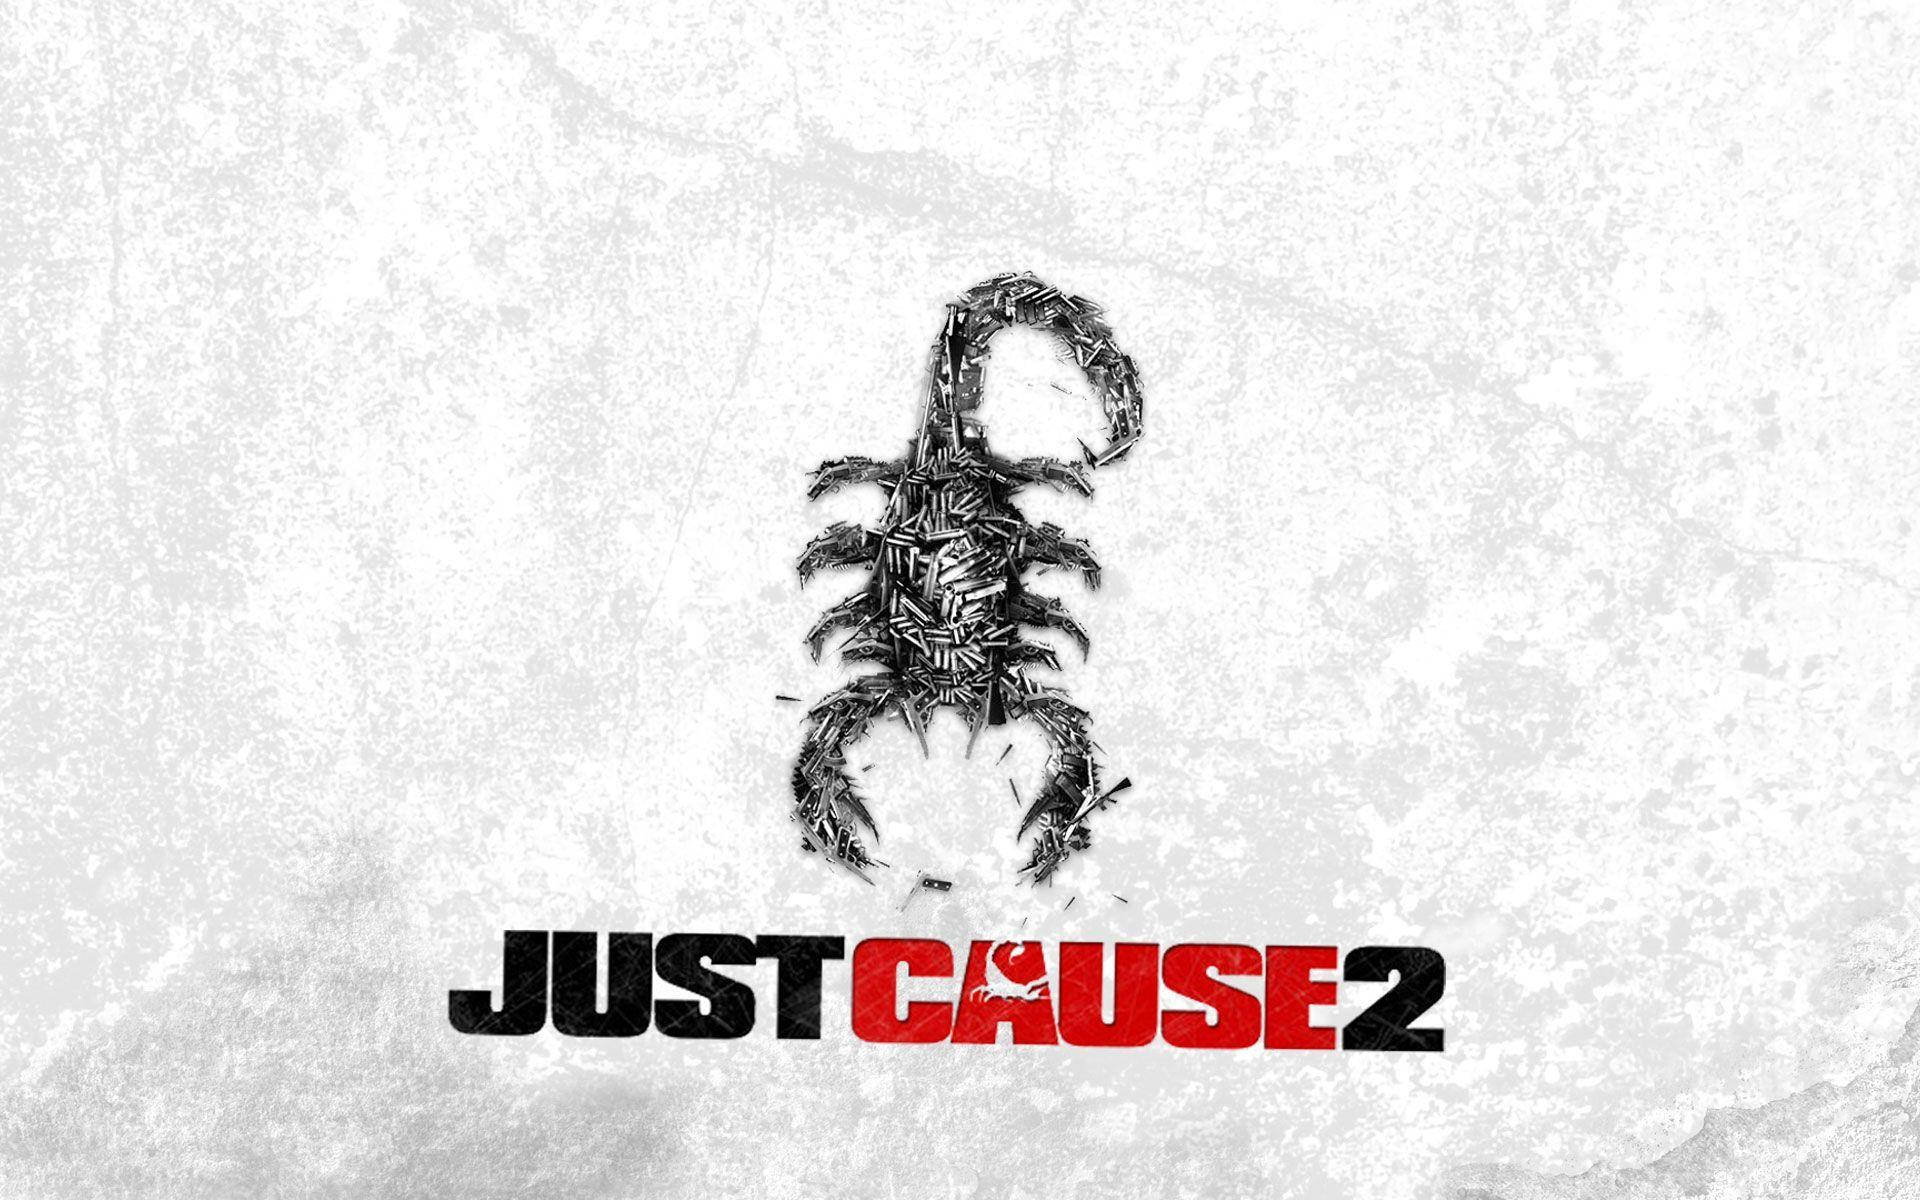 Just Cause 2 Scorpion Game Poster